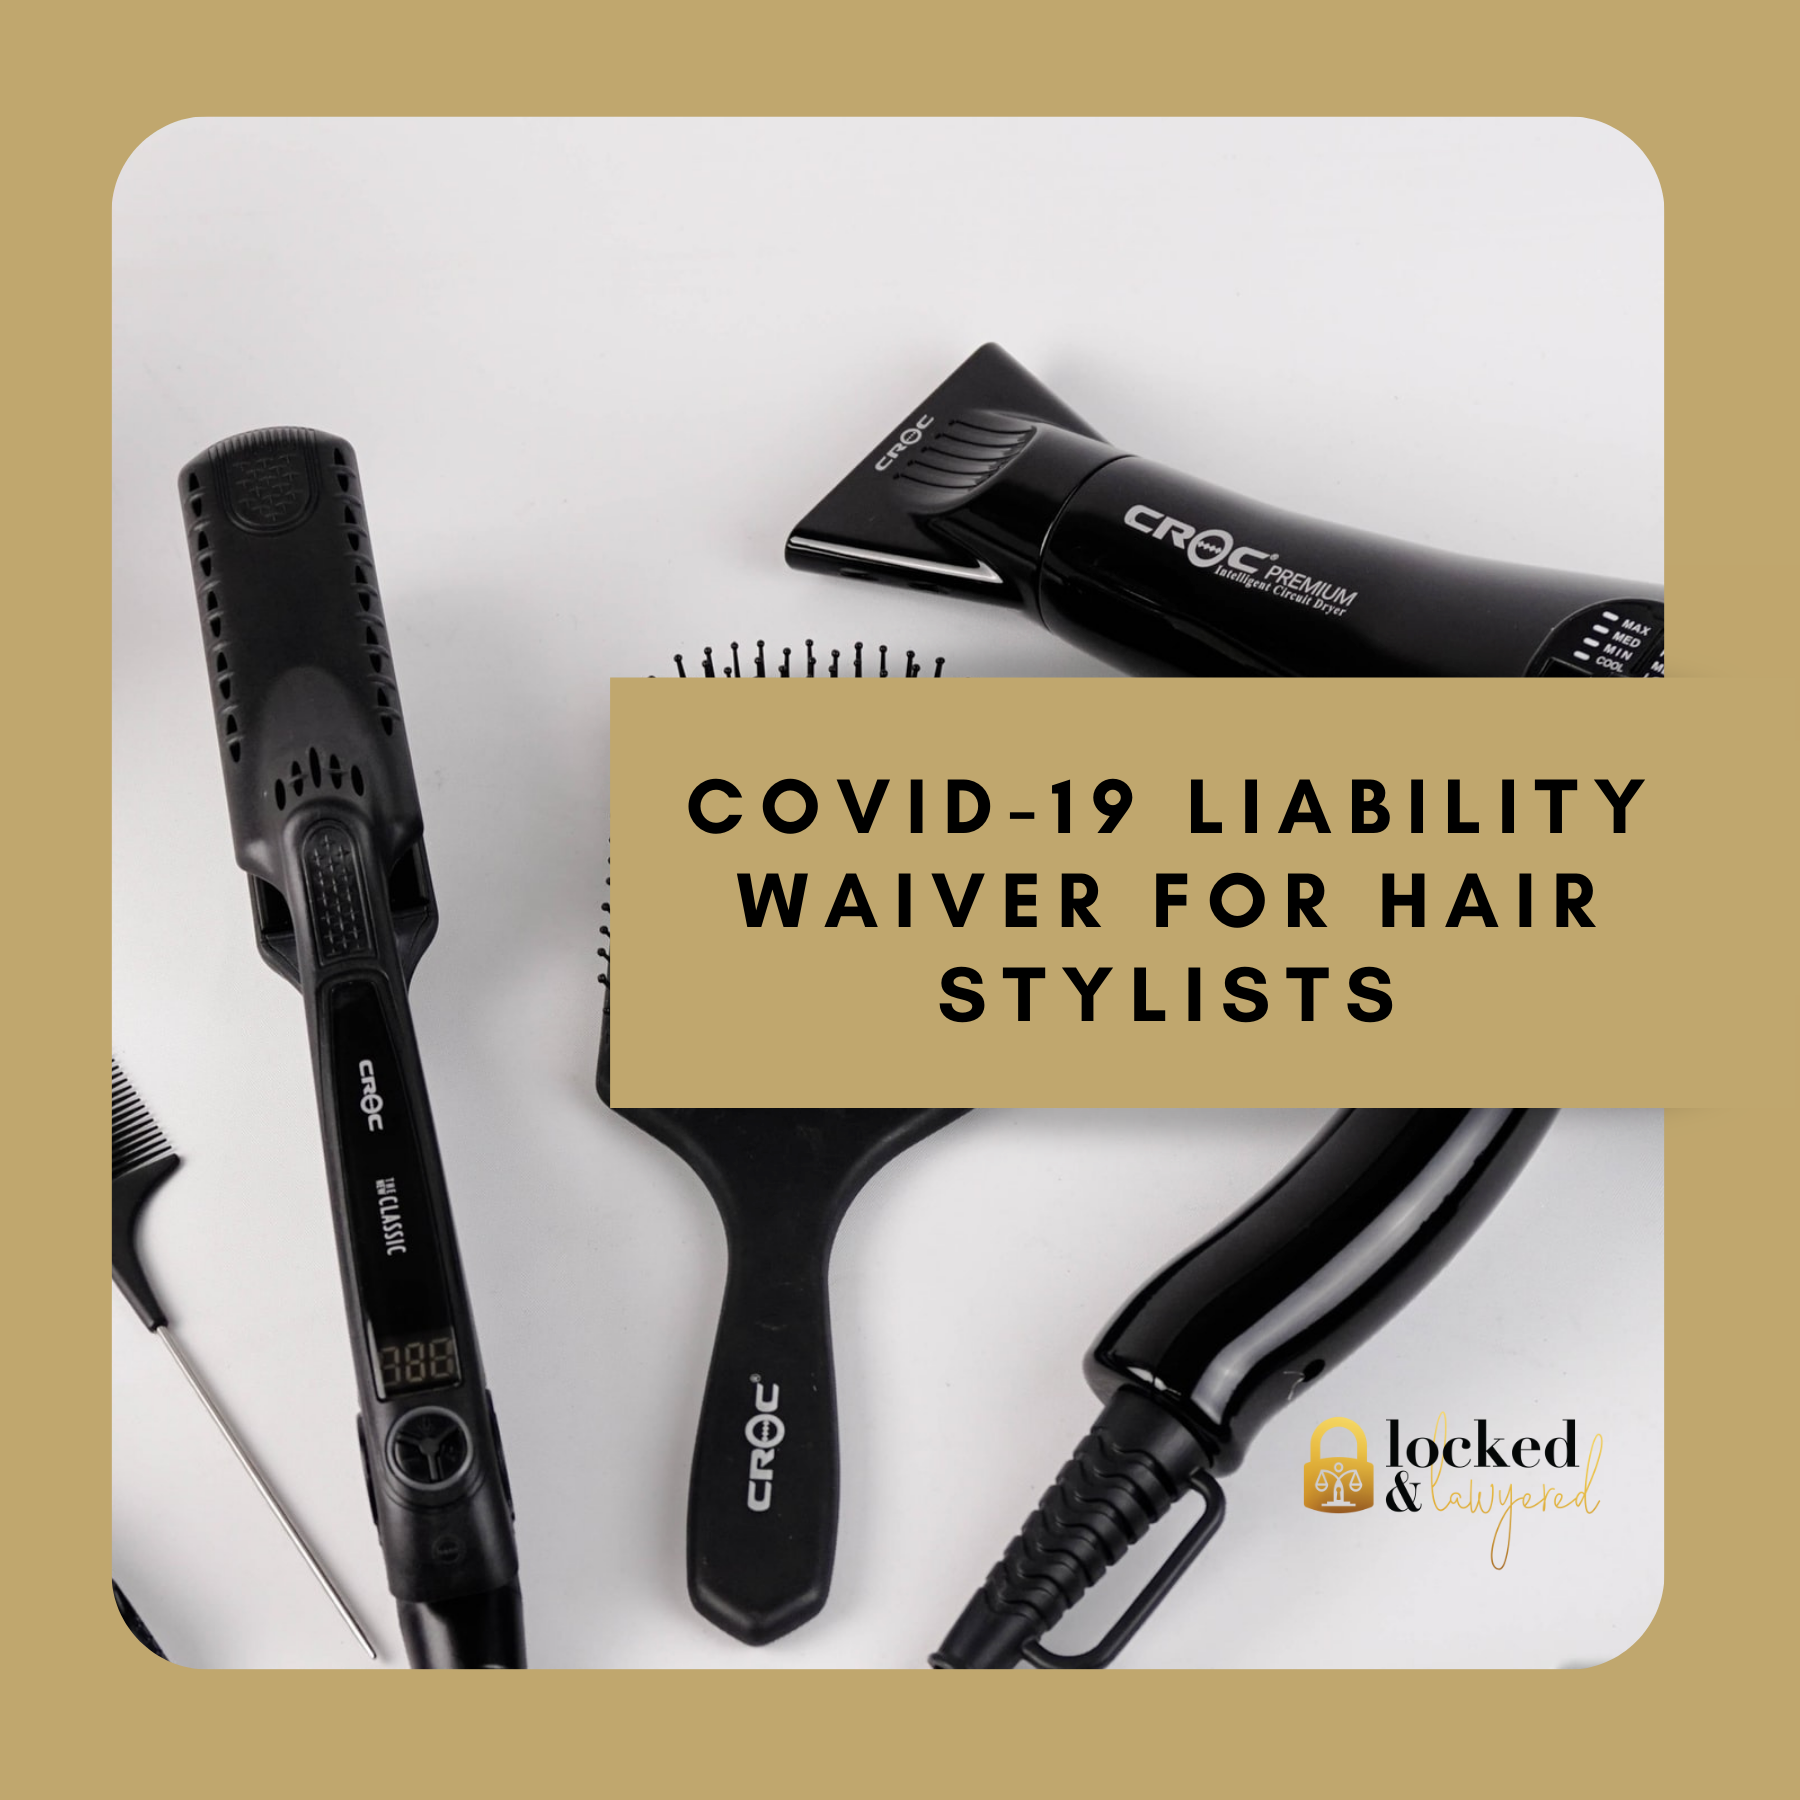 COVID-19 Liability Waiver for Hair Stylists